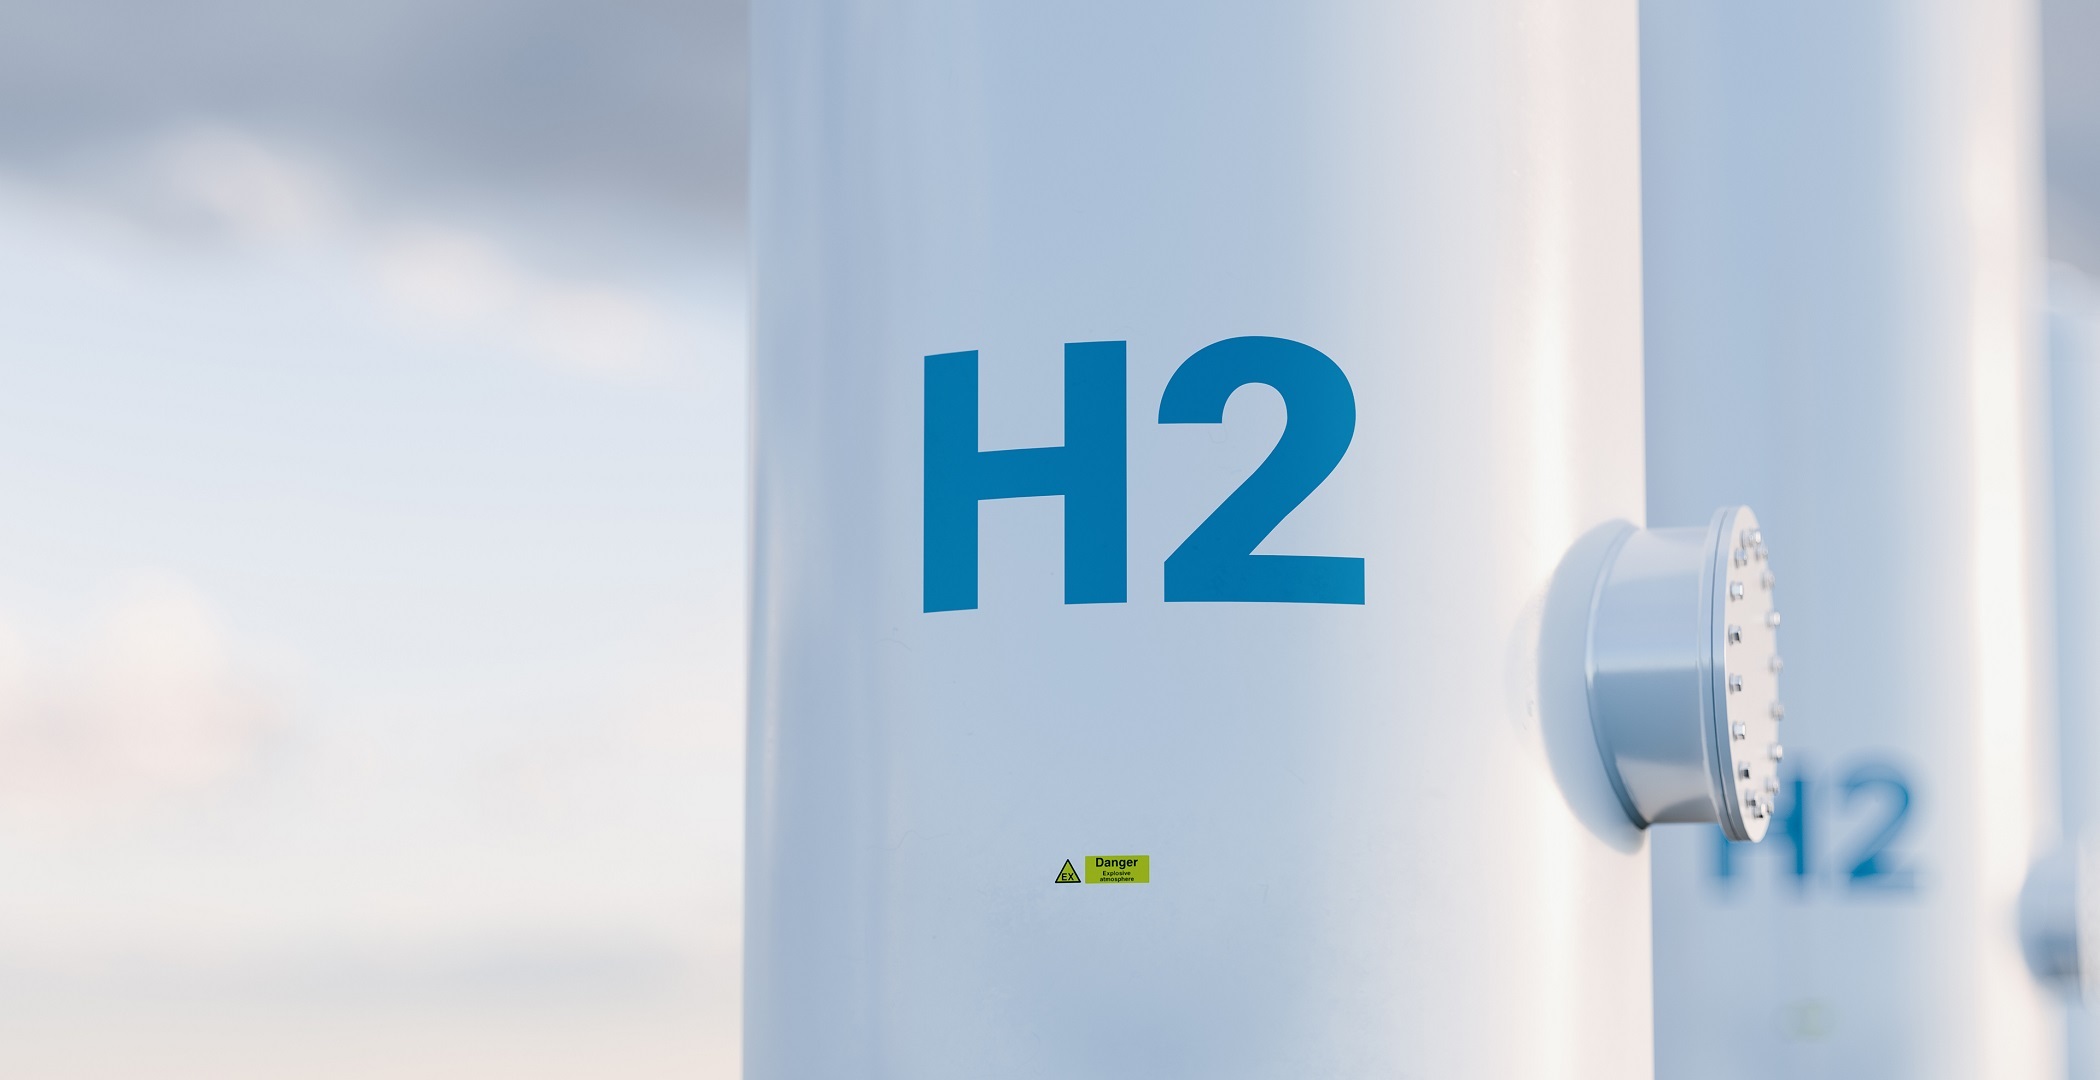 Volvo, Daimler Launch Hydrogen Fuel Cell JV to Accelerate CO2-Neutral Trucking